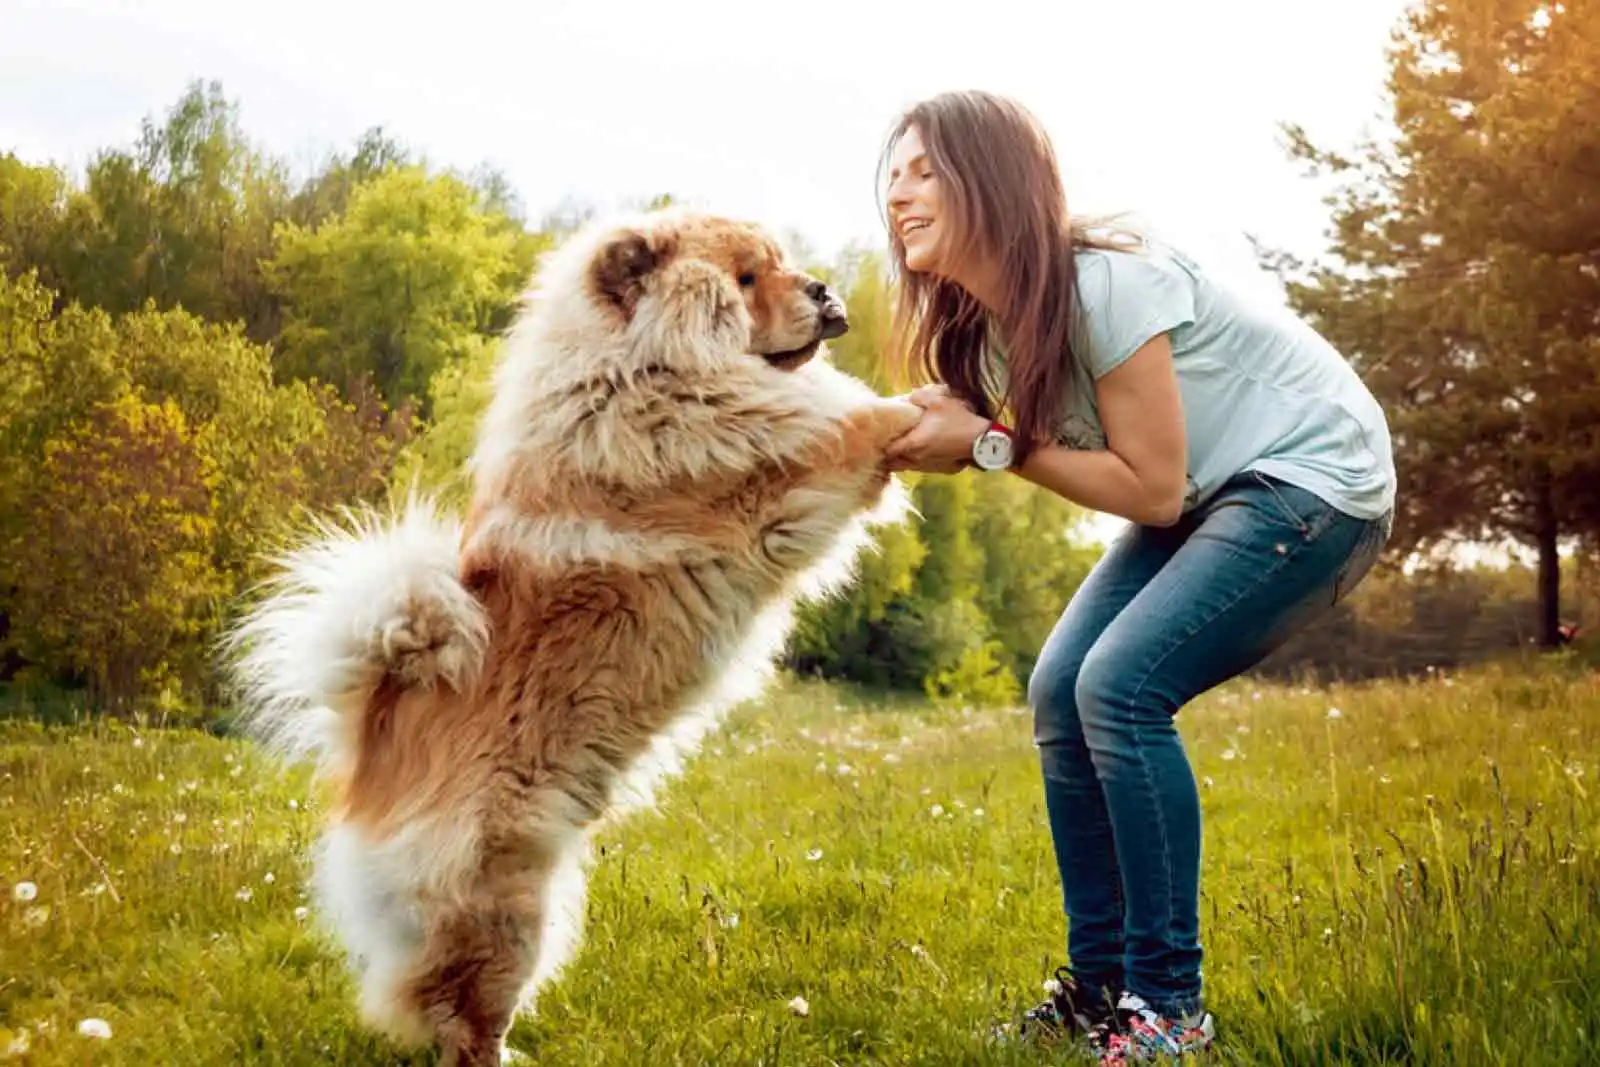 Woman-with-Chow-Dog.webp